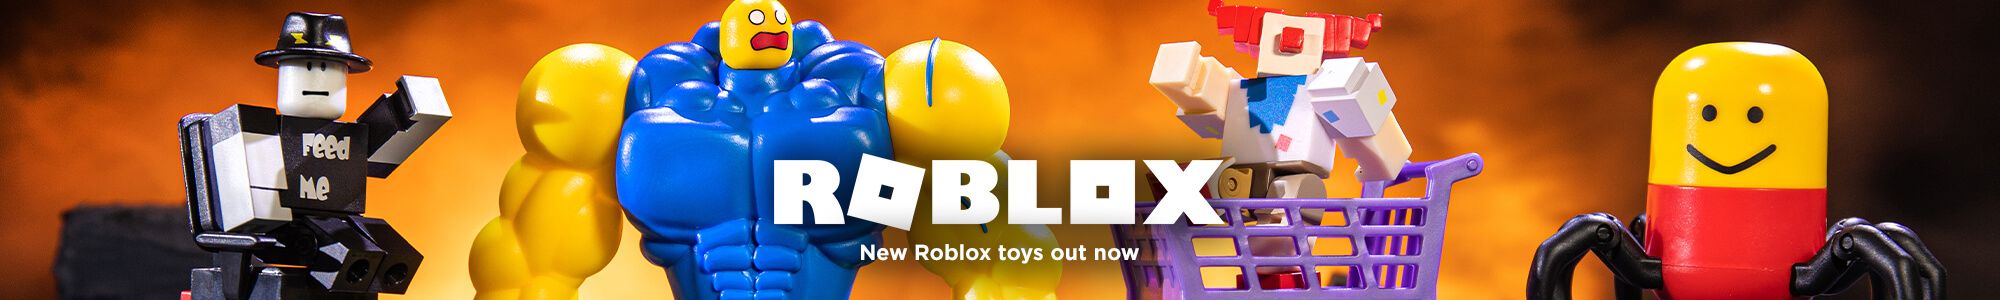 Roblox Roblox Toys Figures The Entertainer - bill in bag jaja roblox